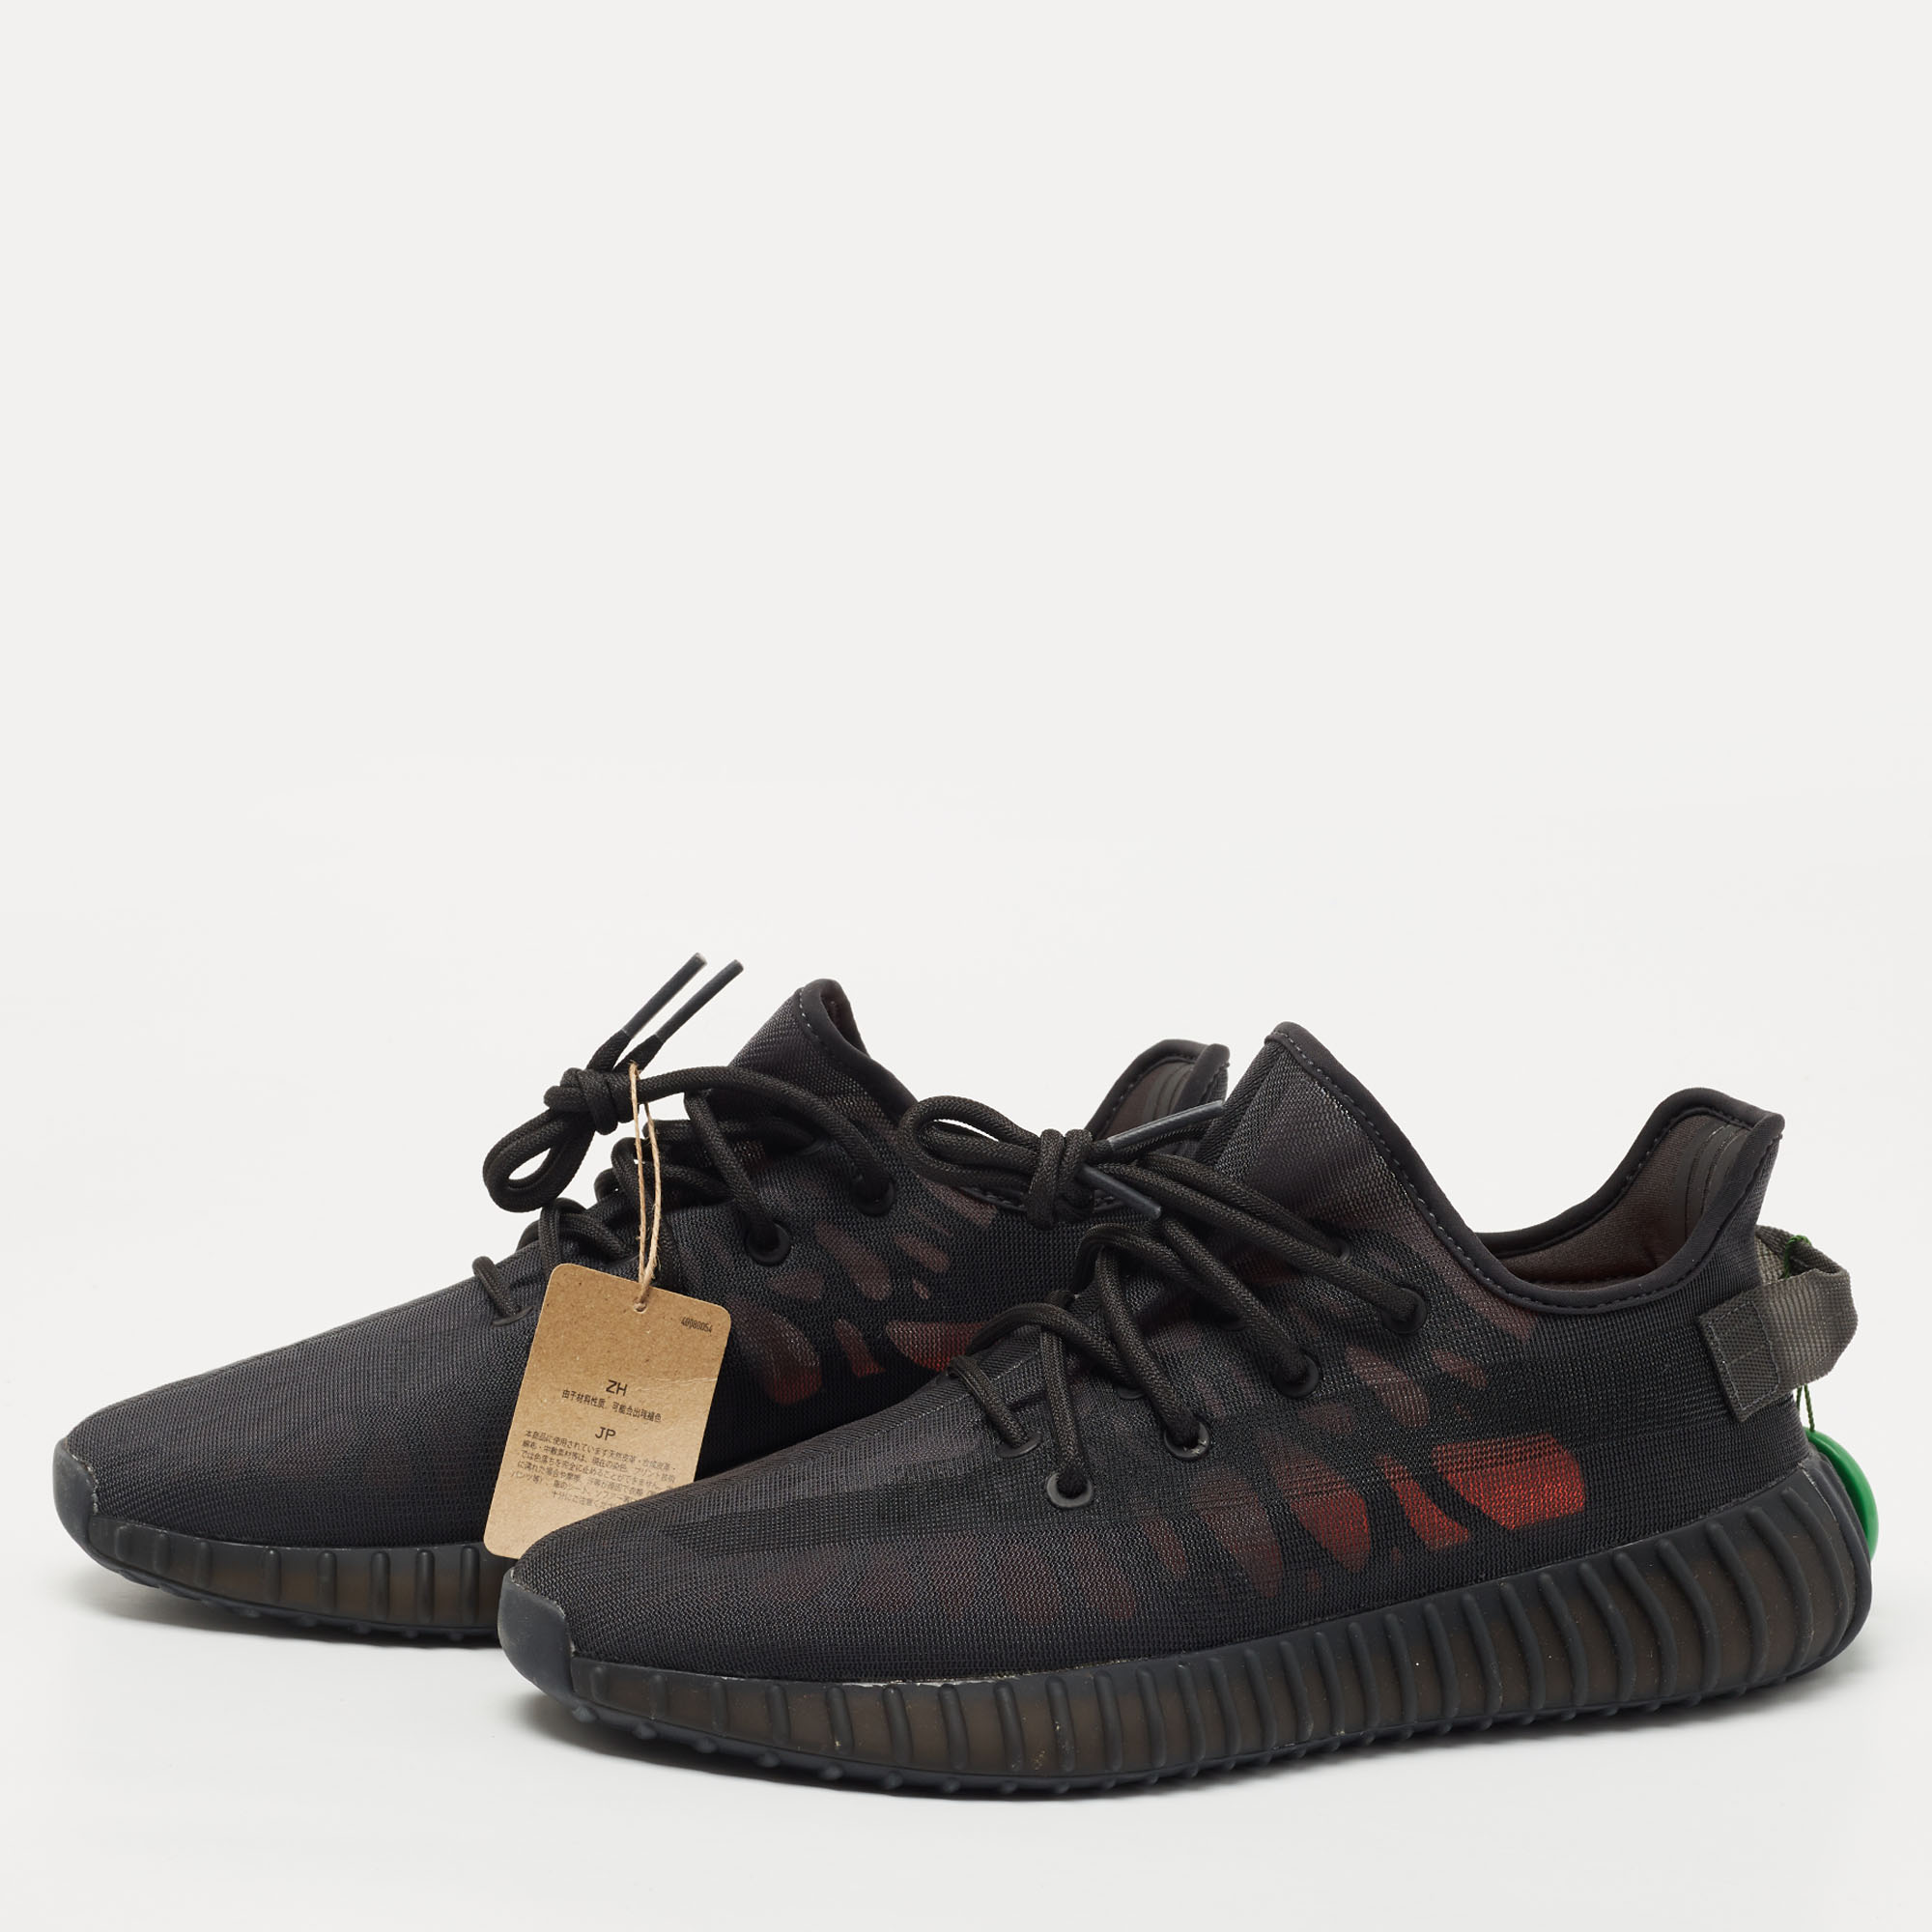 

adidas Yeezy Black Mesh Boost 350 V2 Mono Cinder Sneakers Size